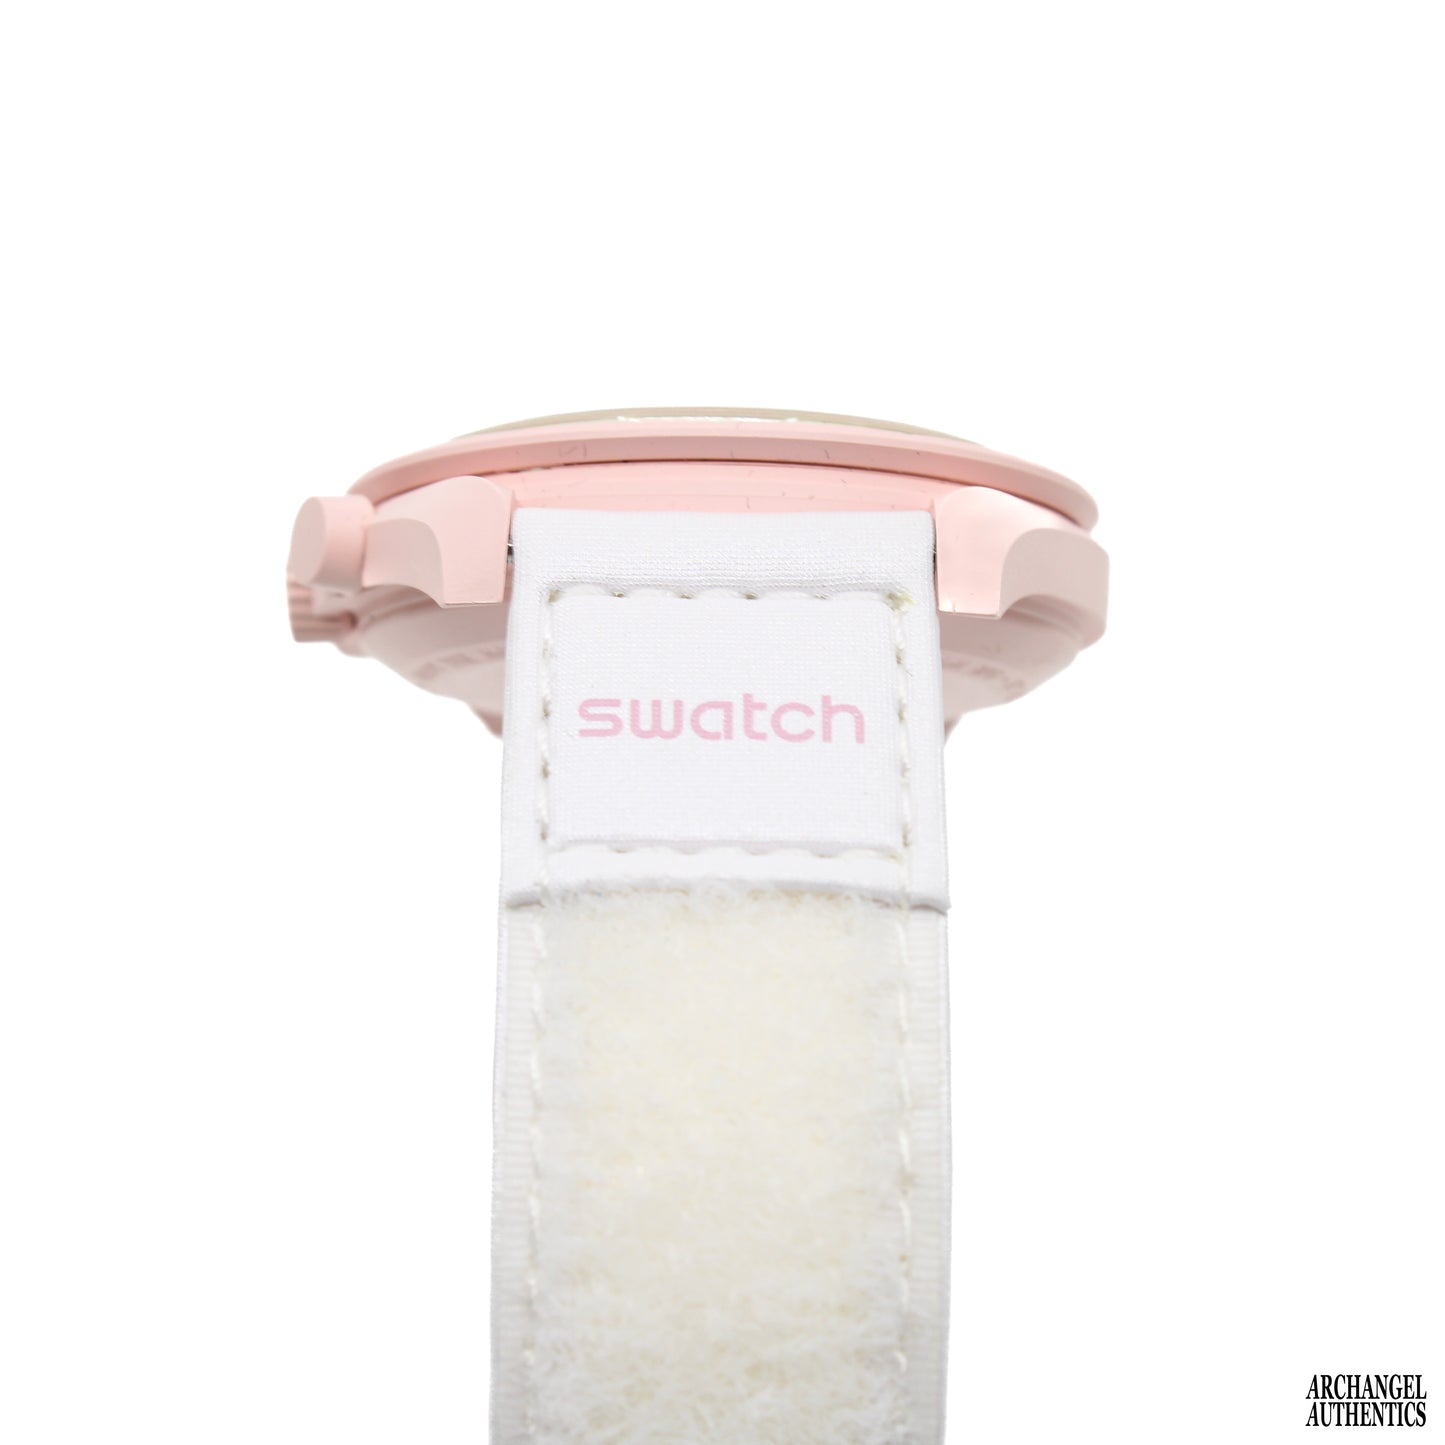 Swatch x Omega MoonSwatch Mission to Venus